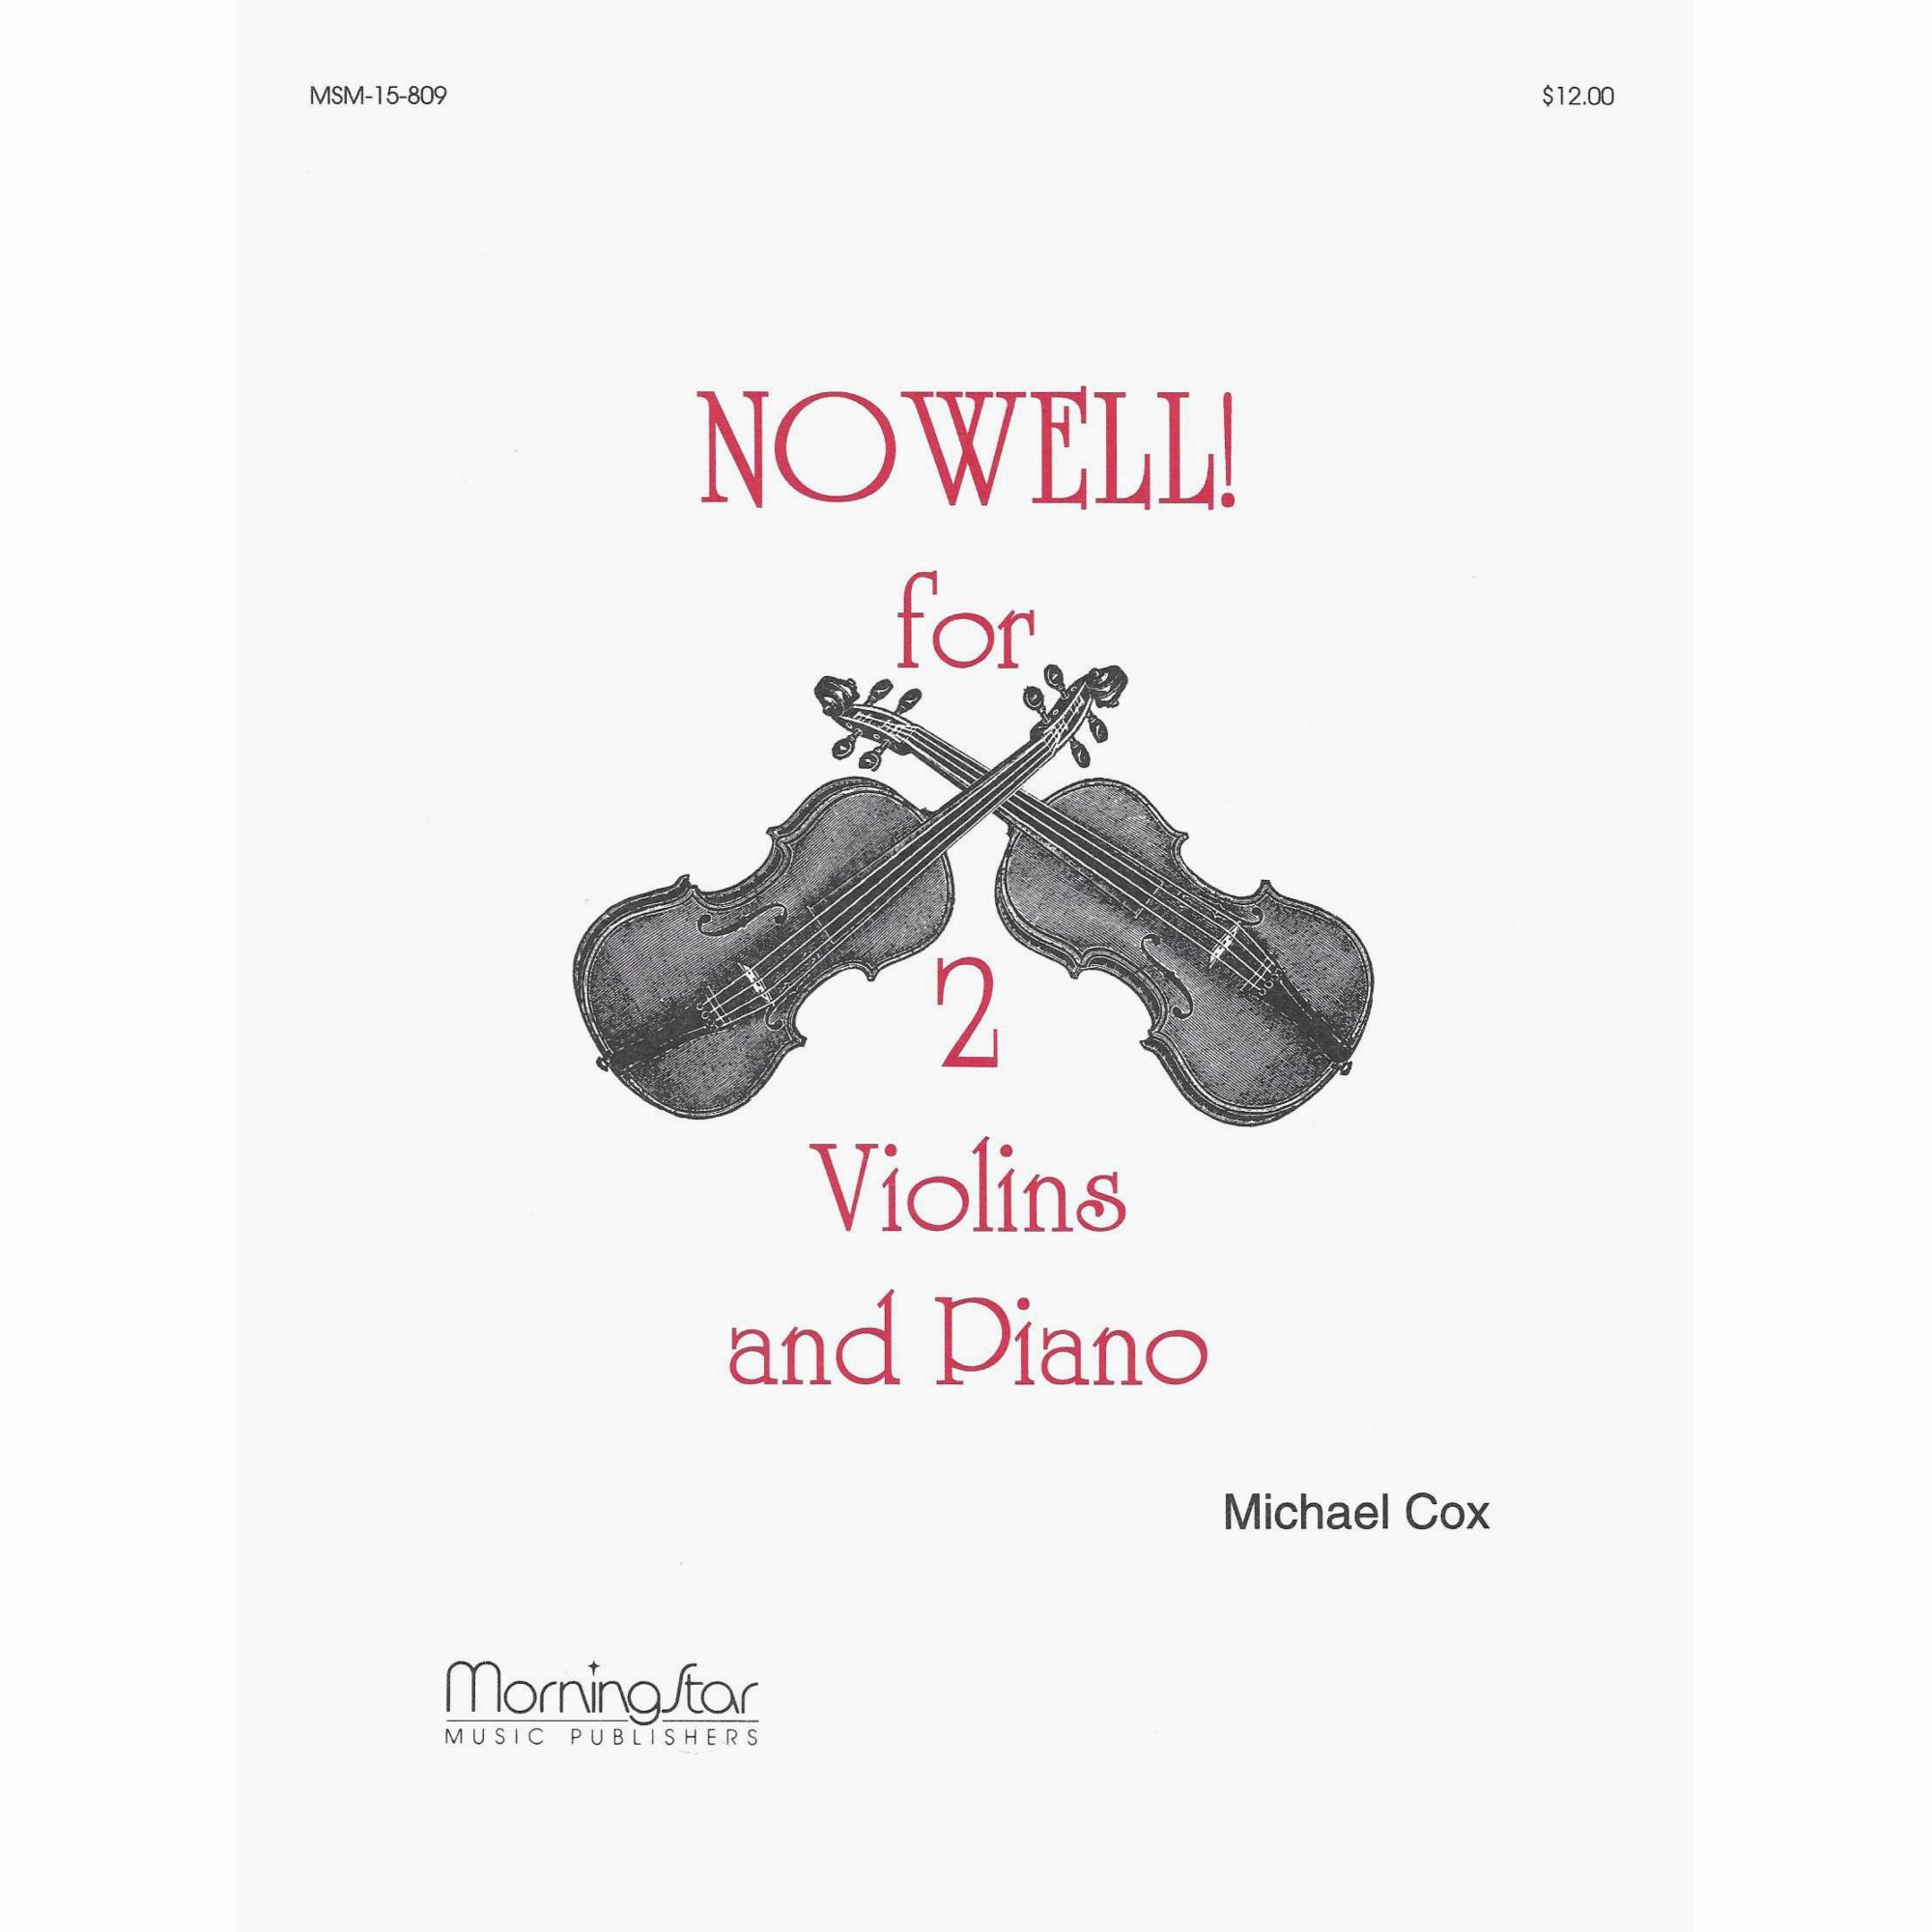 Nowell! for Two Violins and Piano